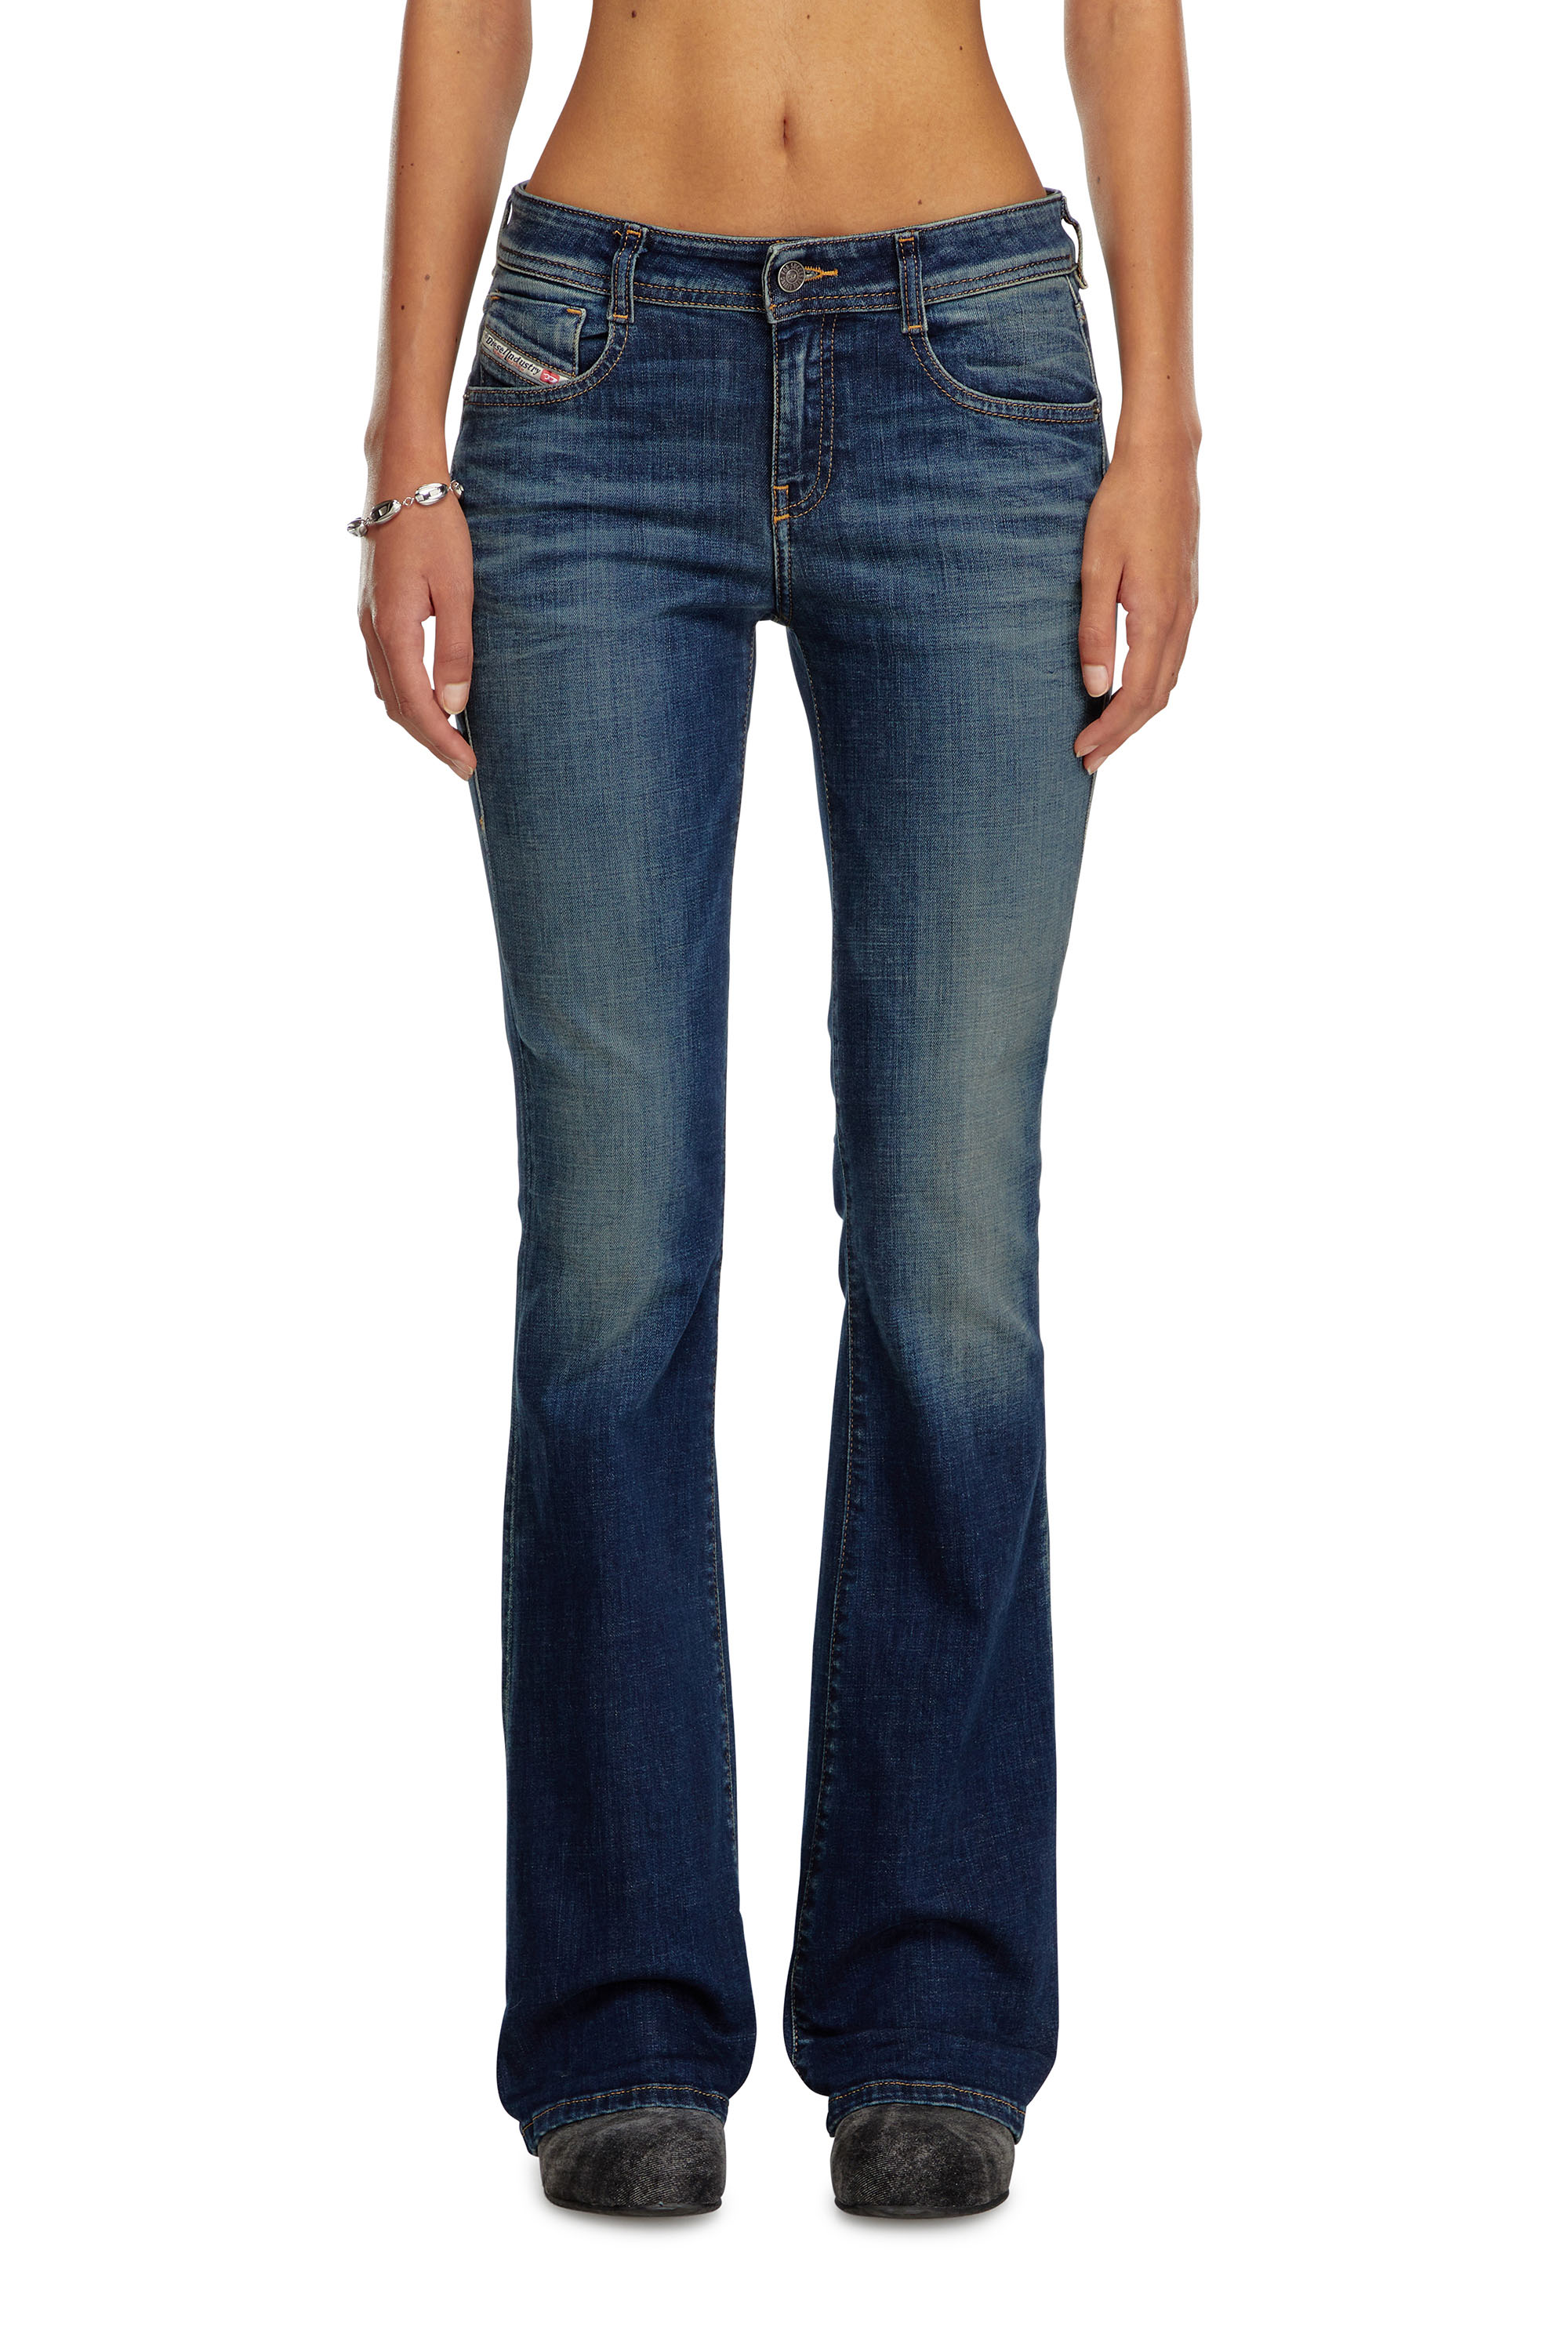 Diesel - Bootcut and Flare Jeans 1969 D-Ebbey 09J20, Mujer Bootcut y Flare Jeans - 1969 D-Ebbey in Azul marino - Image 2